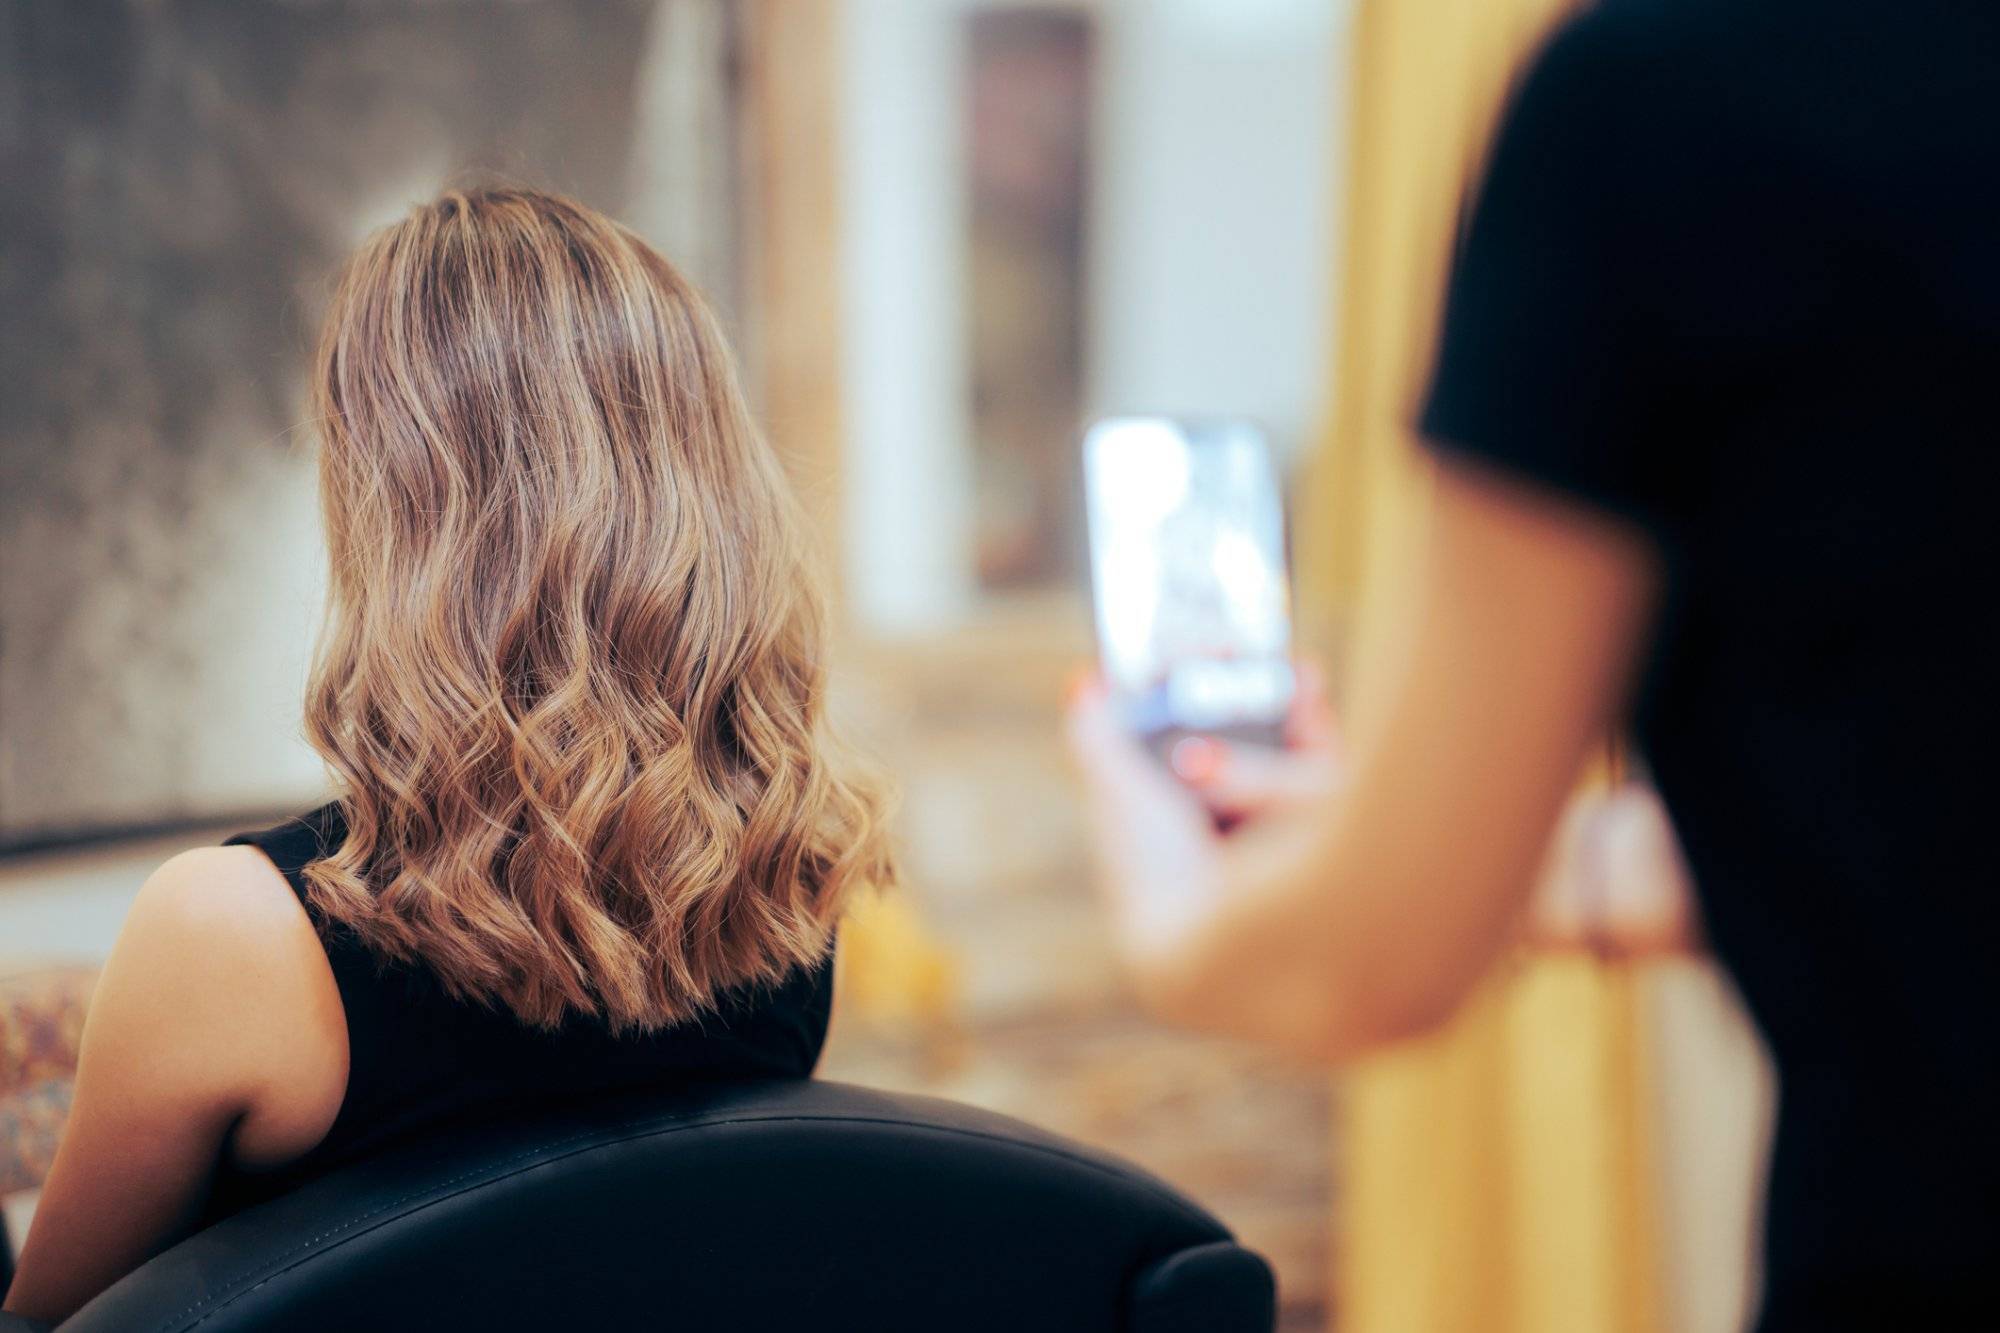 Revamp Your Look at This Carrollton Beauty Salon at Beltline & Webb Chapel